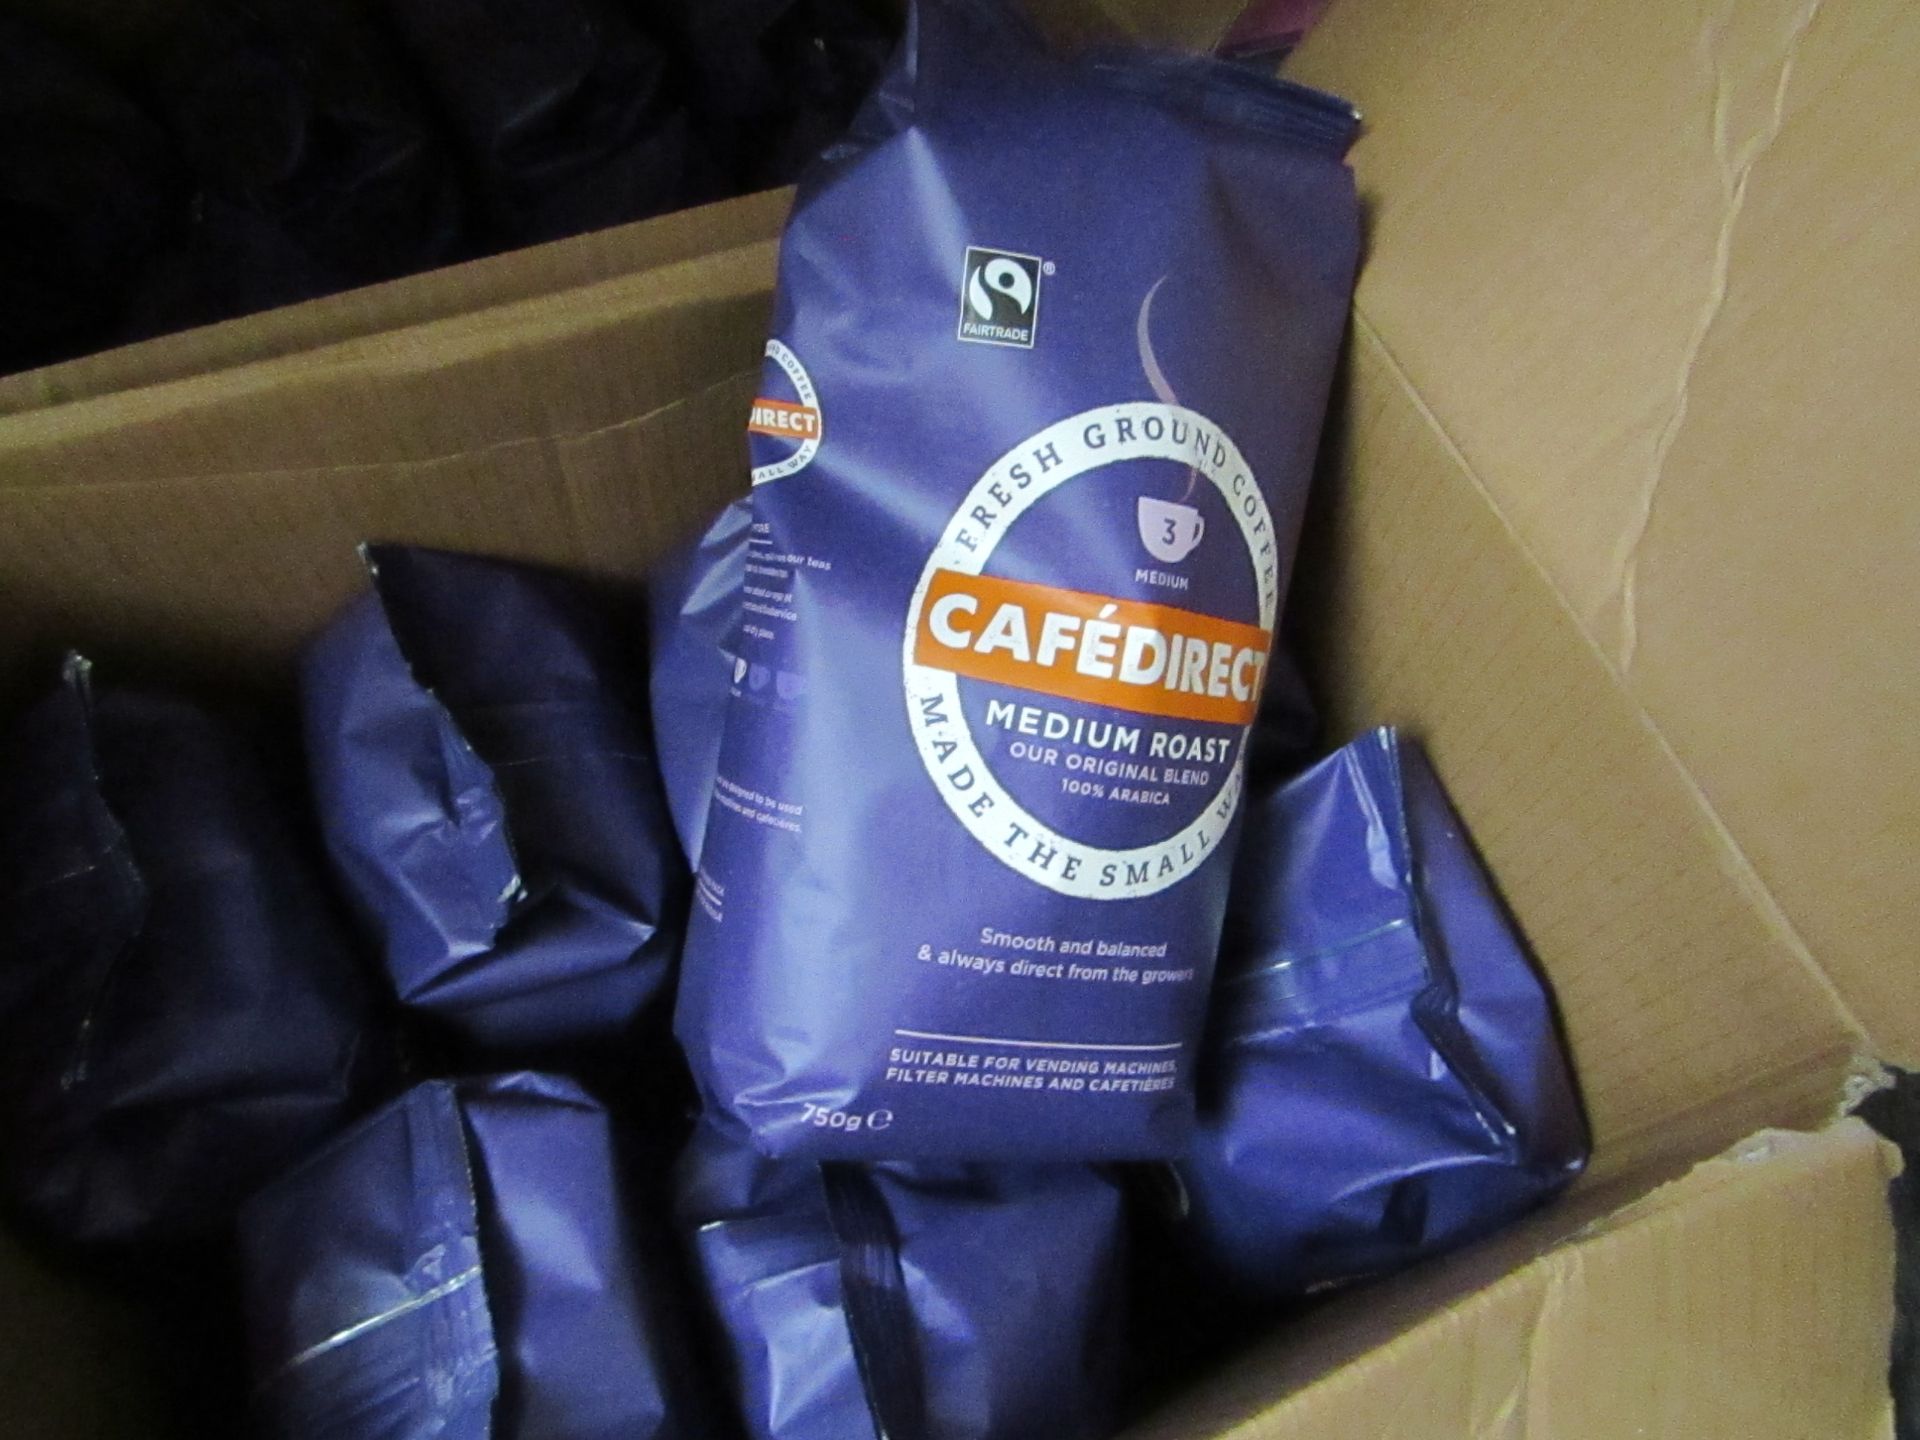 2x 750g bags of Cafedirect - Medium Roast Fresh Ground Coffee (Strength 3) - All Packaged, RRP £10